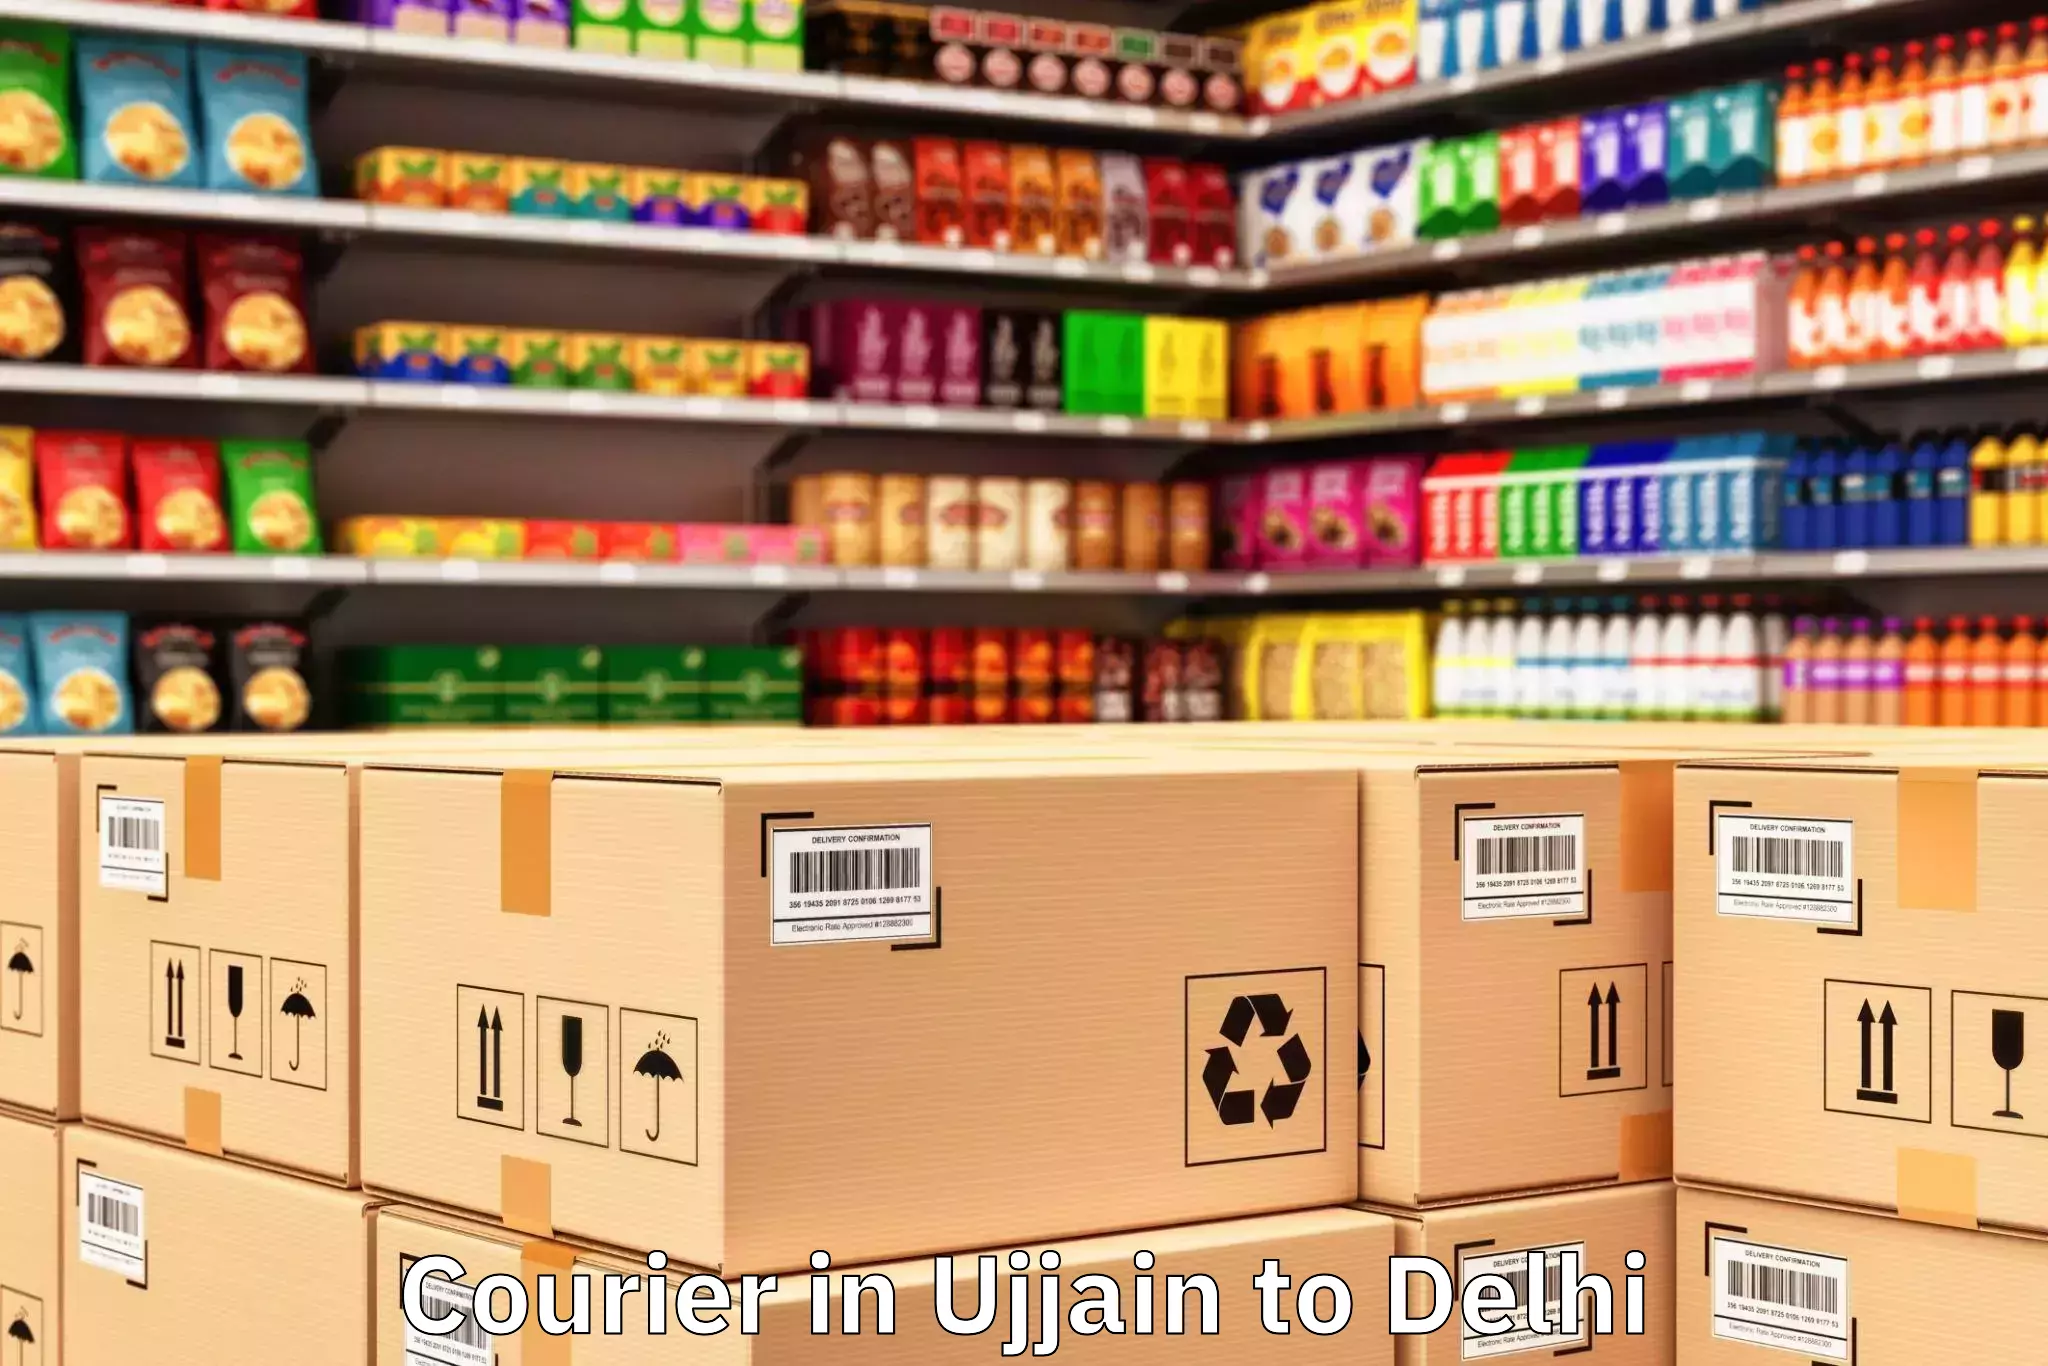 Easy Ujjain to Unity One Mall Janakpuri Courier Booking